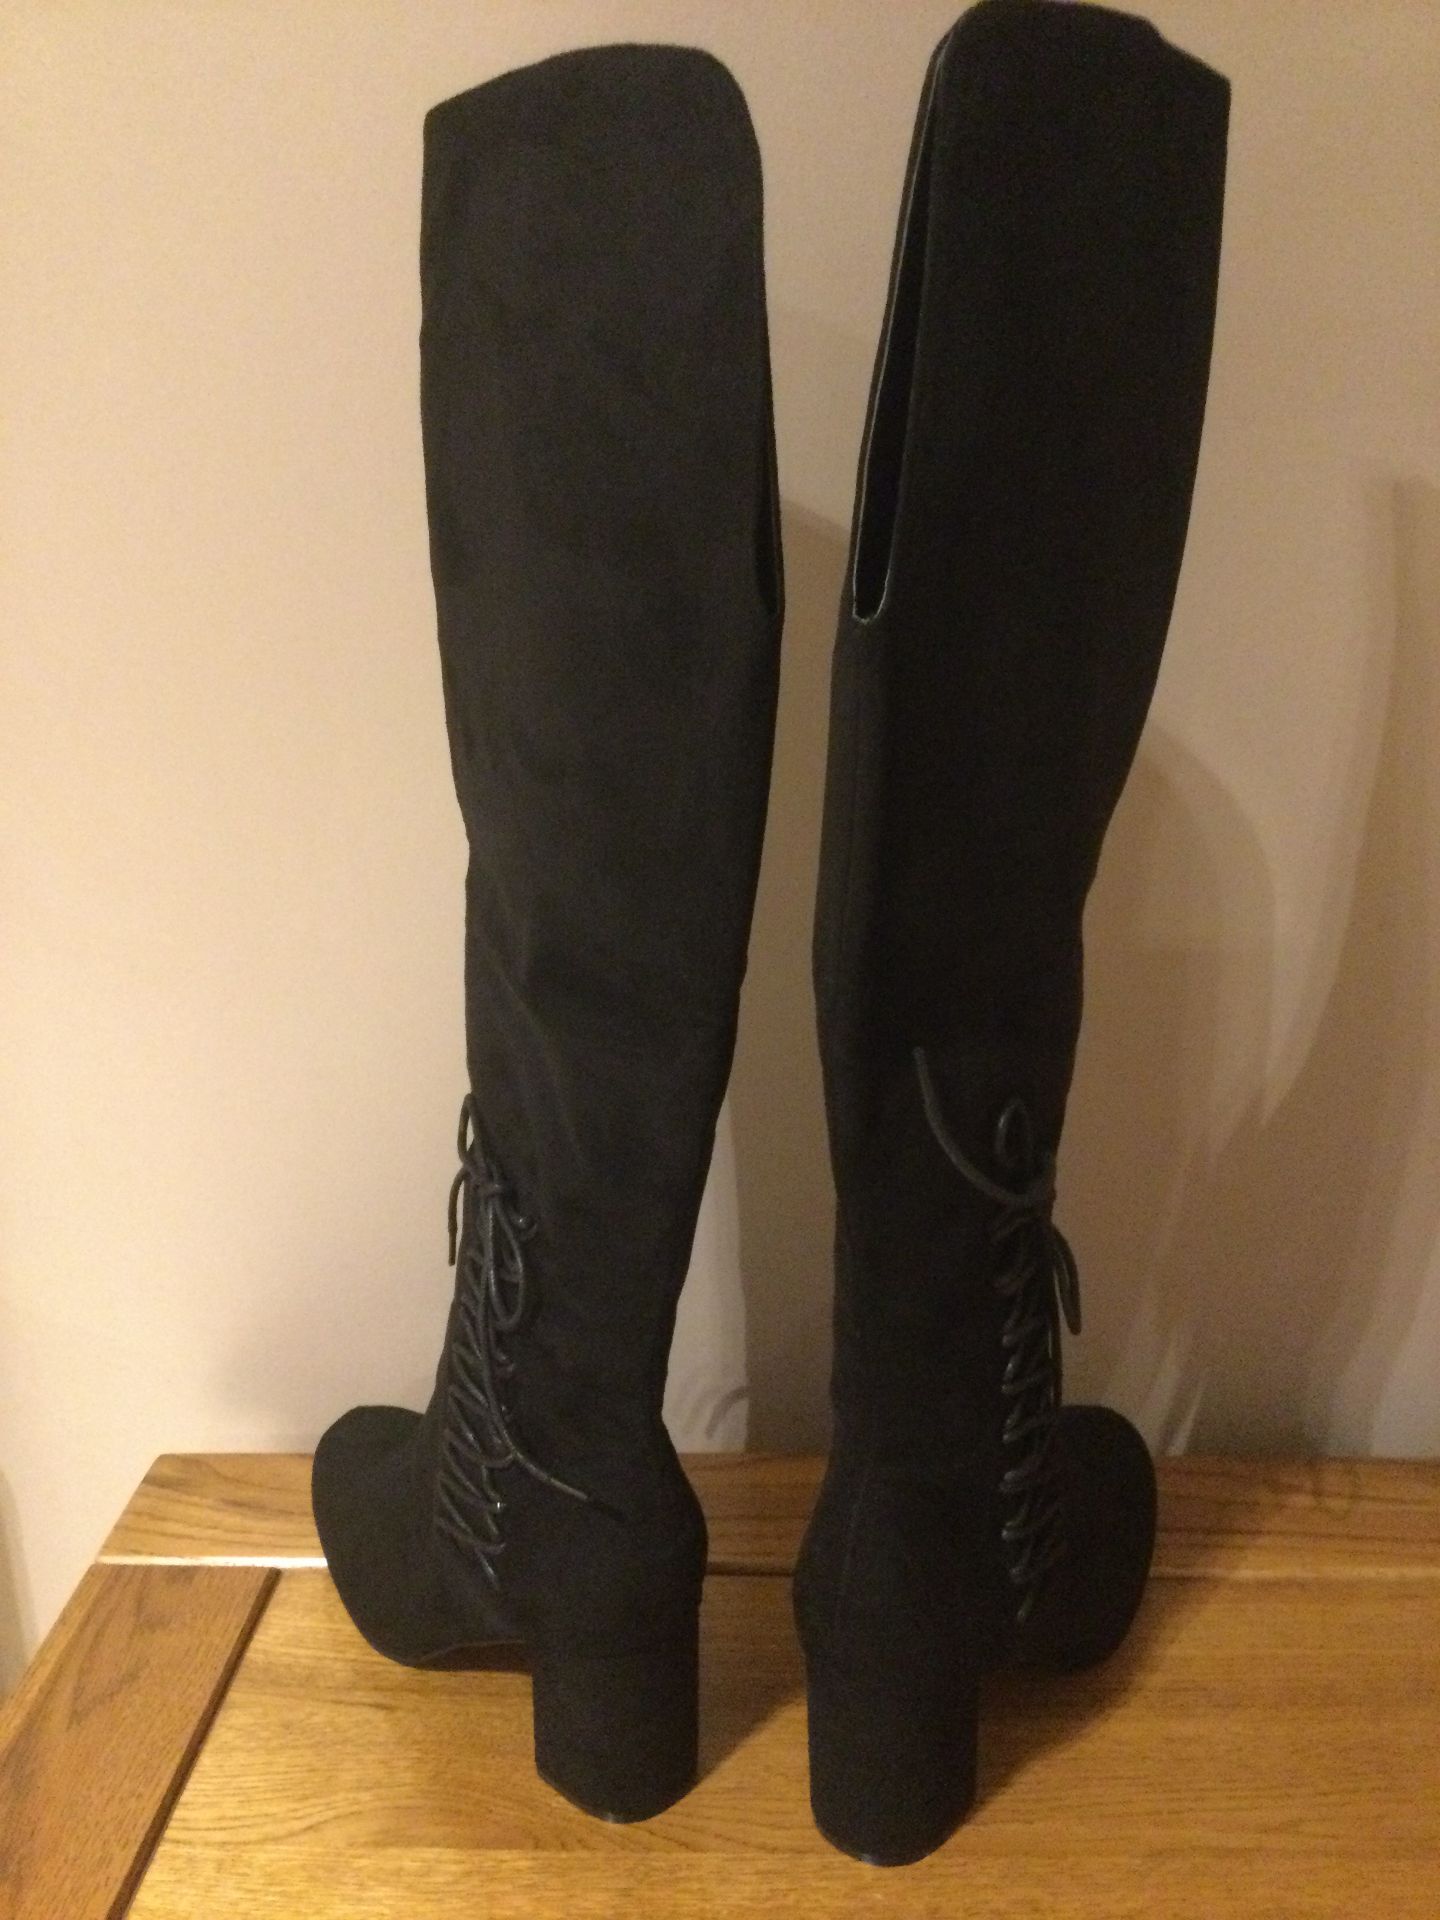 Dolcis “Emma” Long Boots, Block Heel, Size 3, Black - New RRP £55.00 - Image 4 of 7